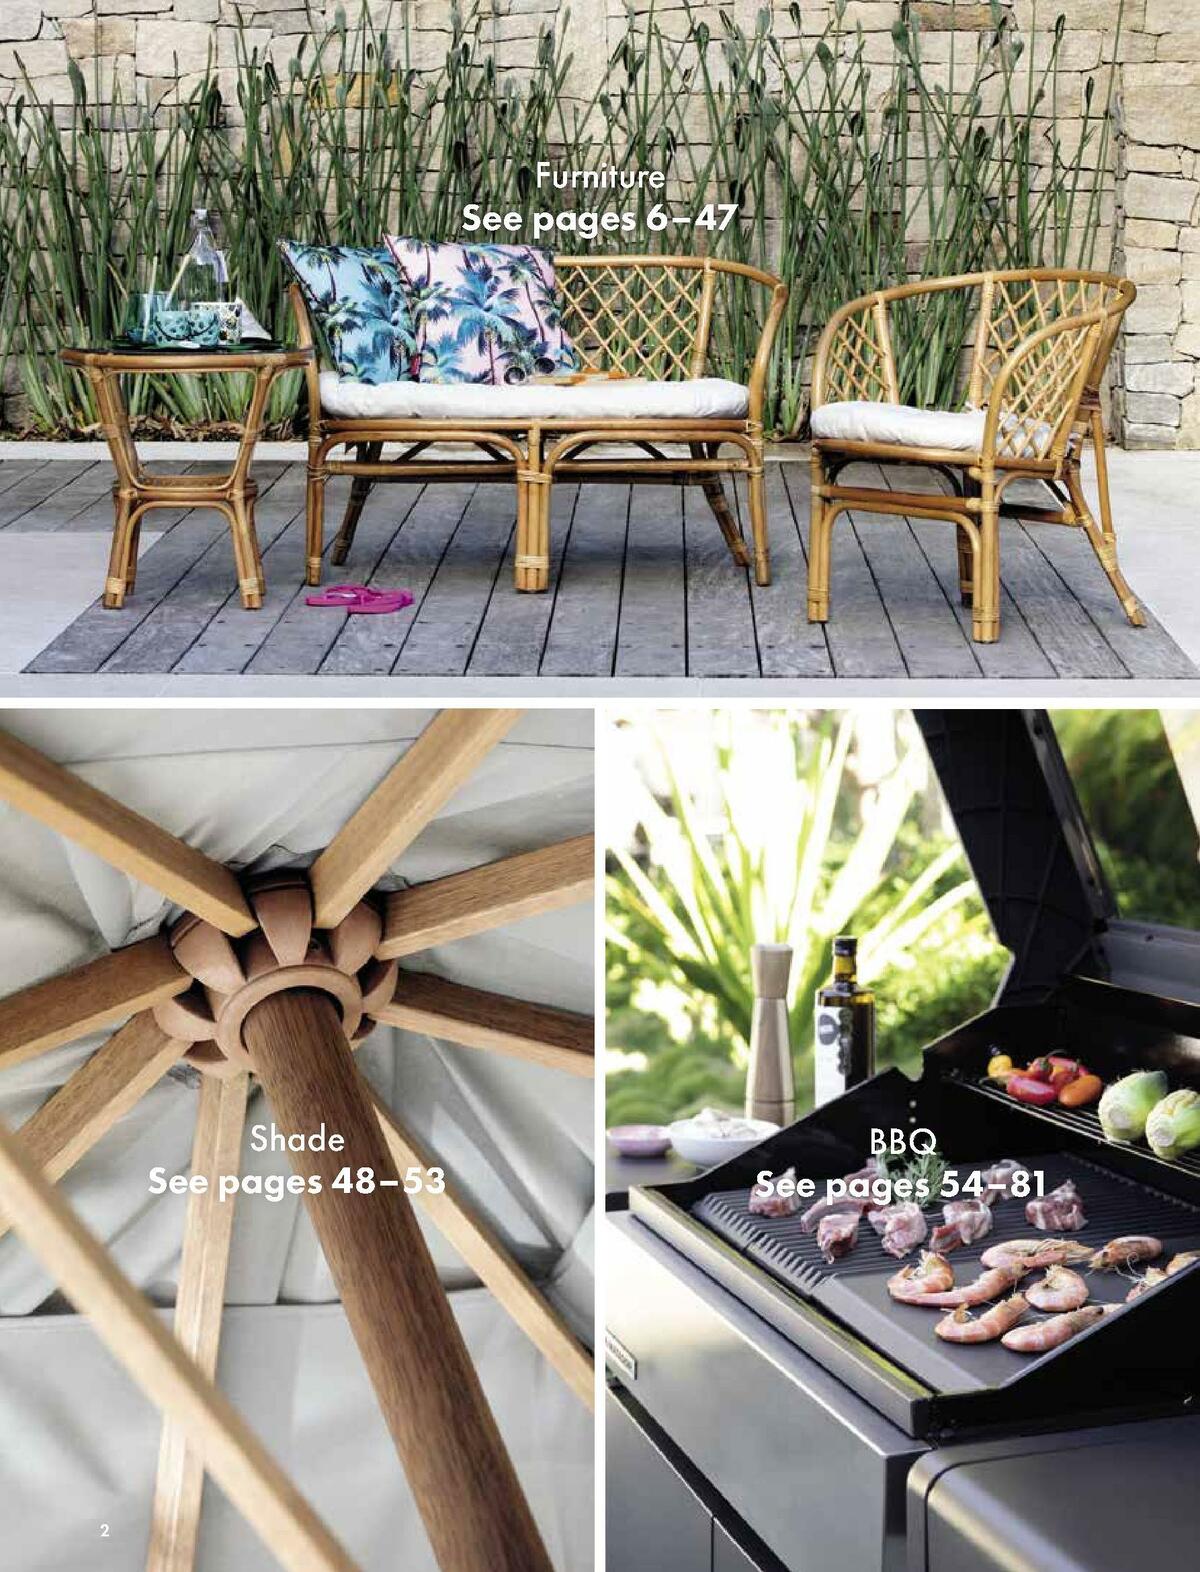 Bunnings Warehouse Outdoor Living Range Book Catalogues from 1 December